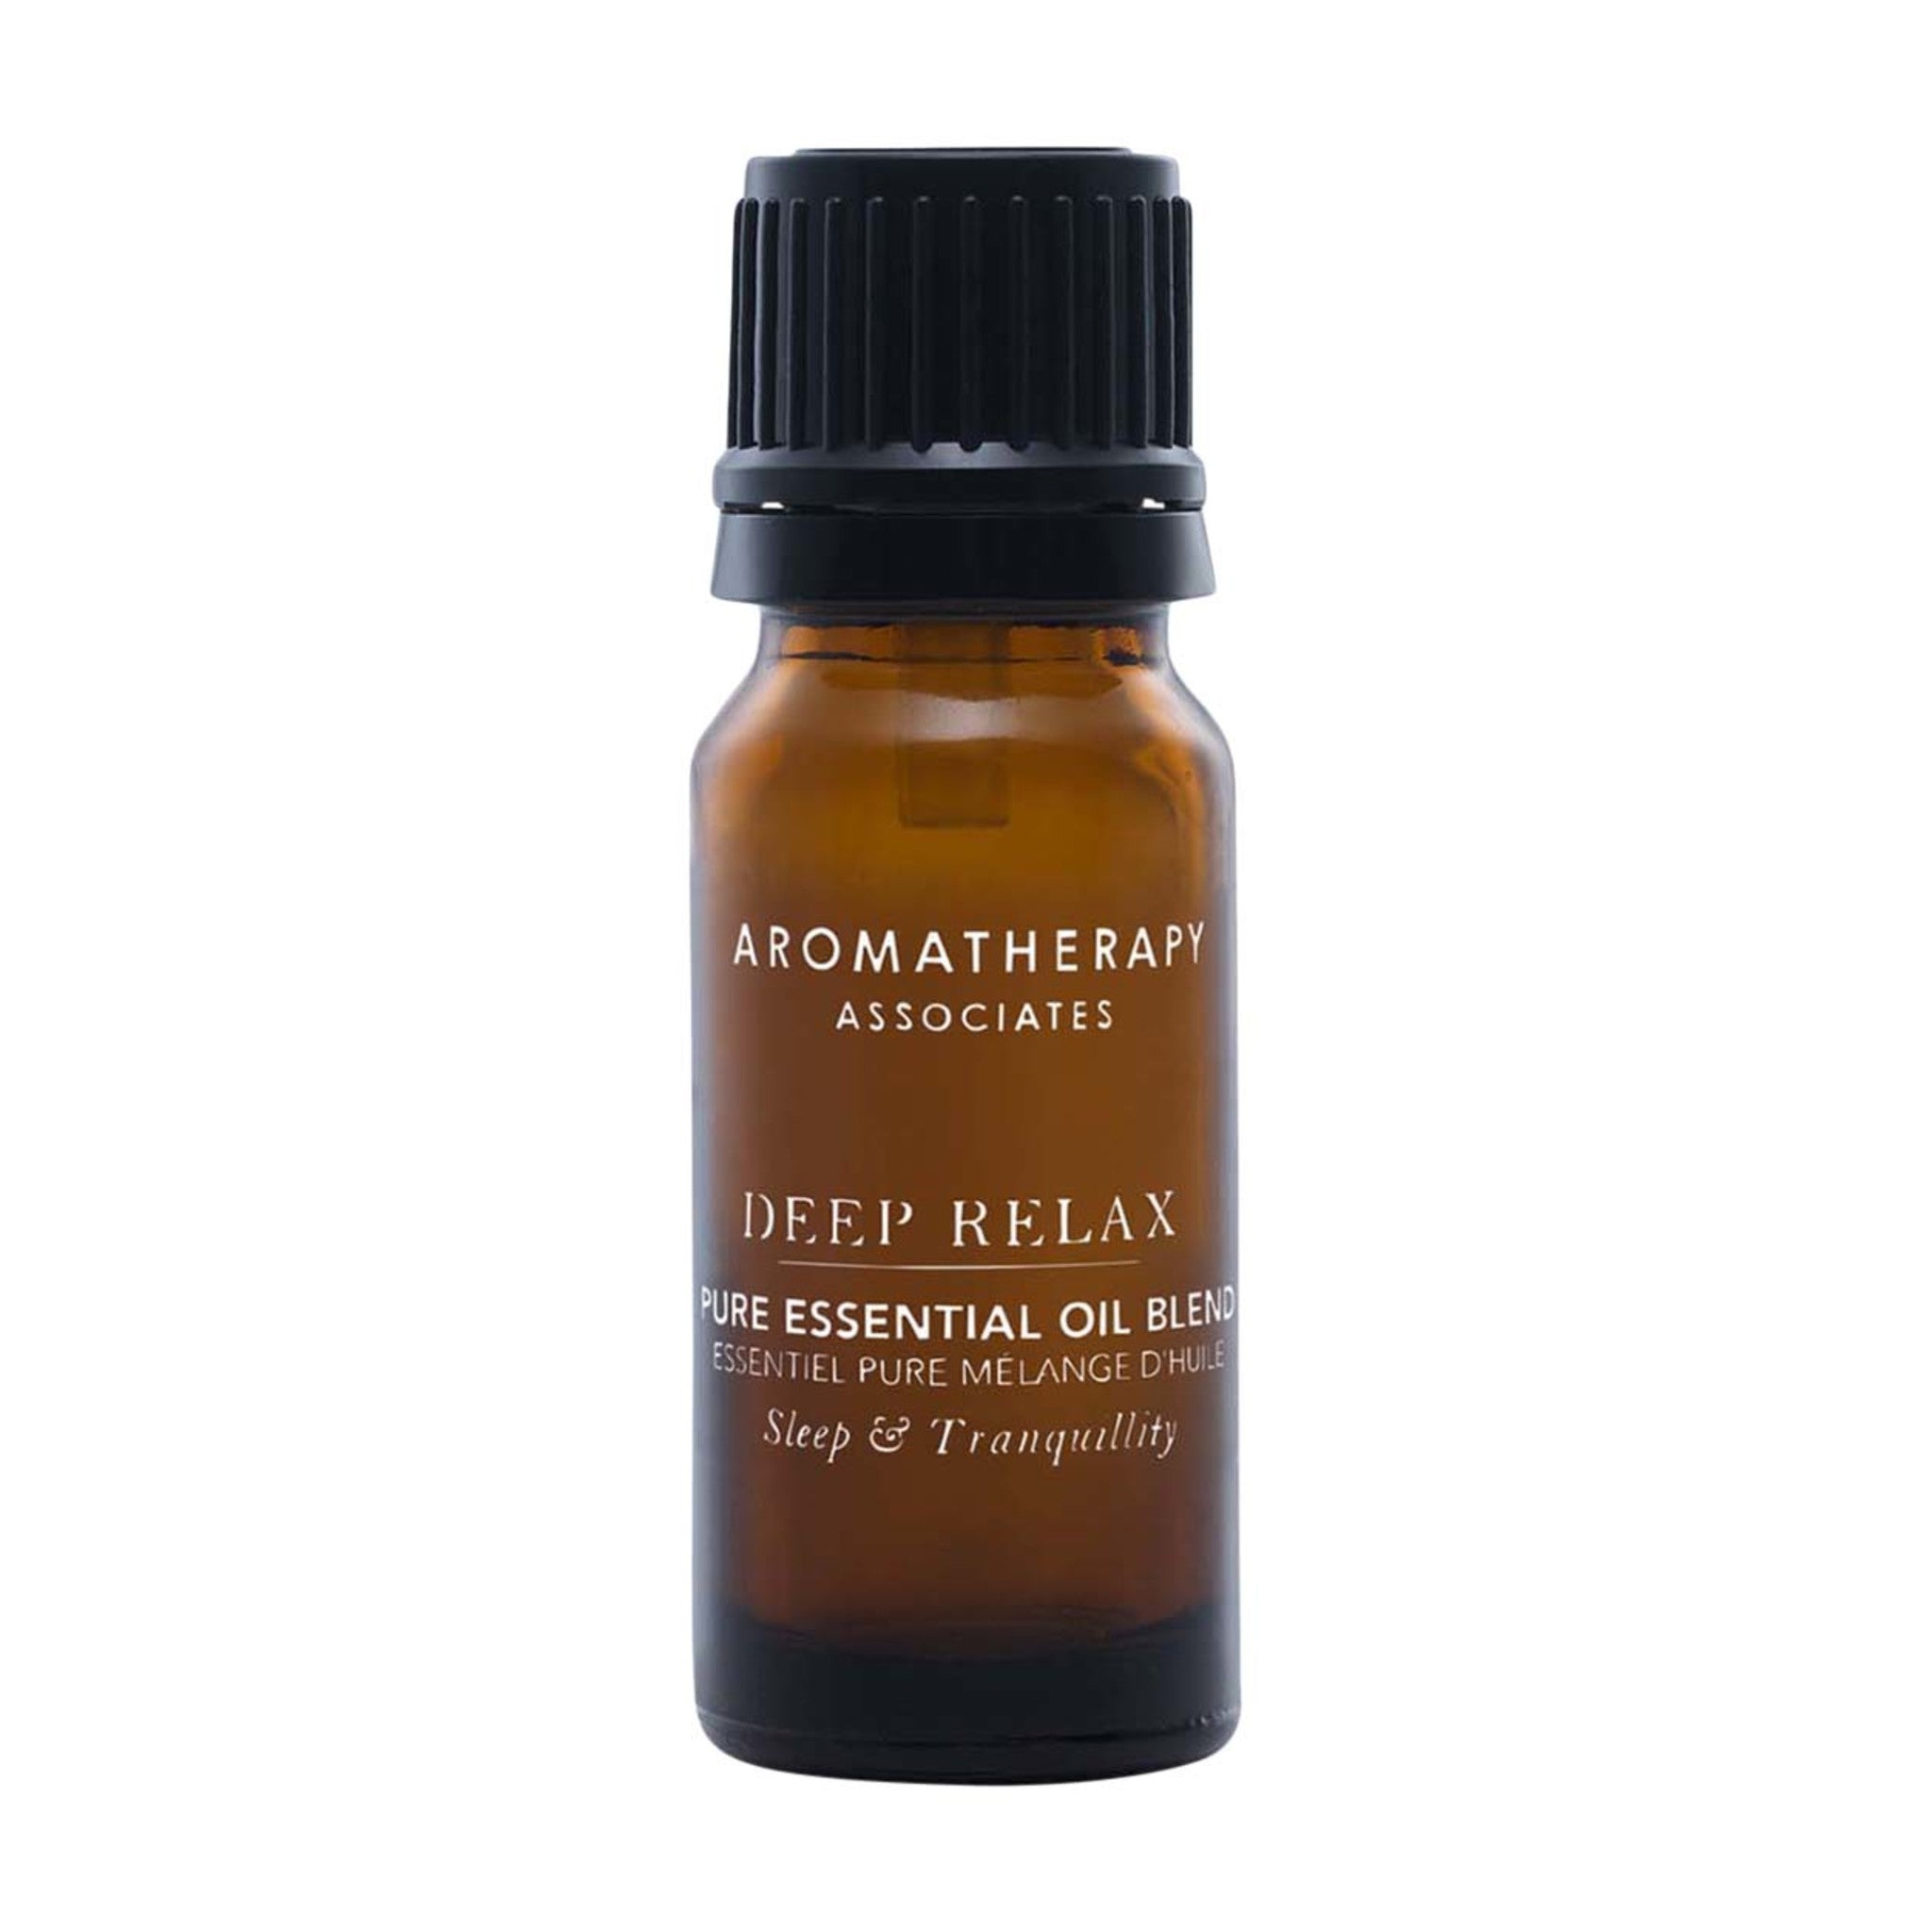 Aromatherapy Associates Deep Relax Pure Essential Oil Blend main image.